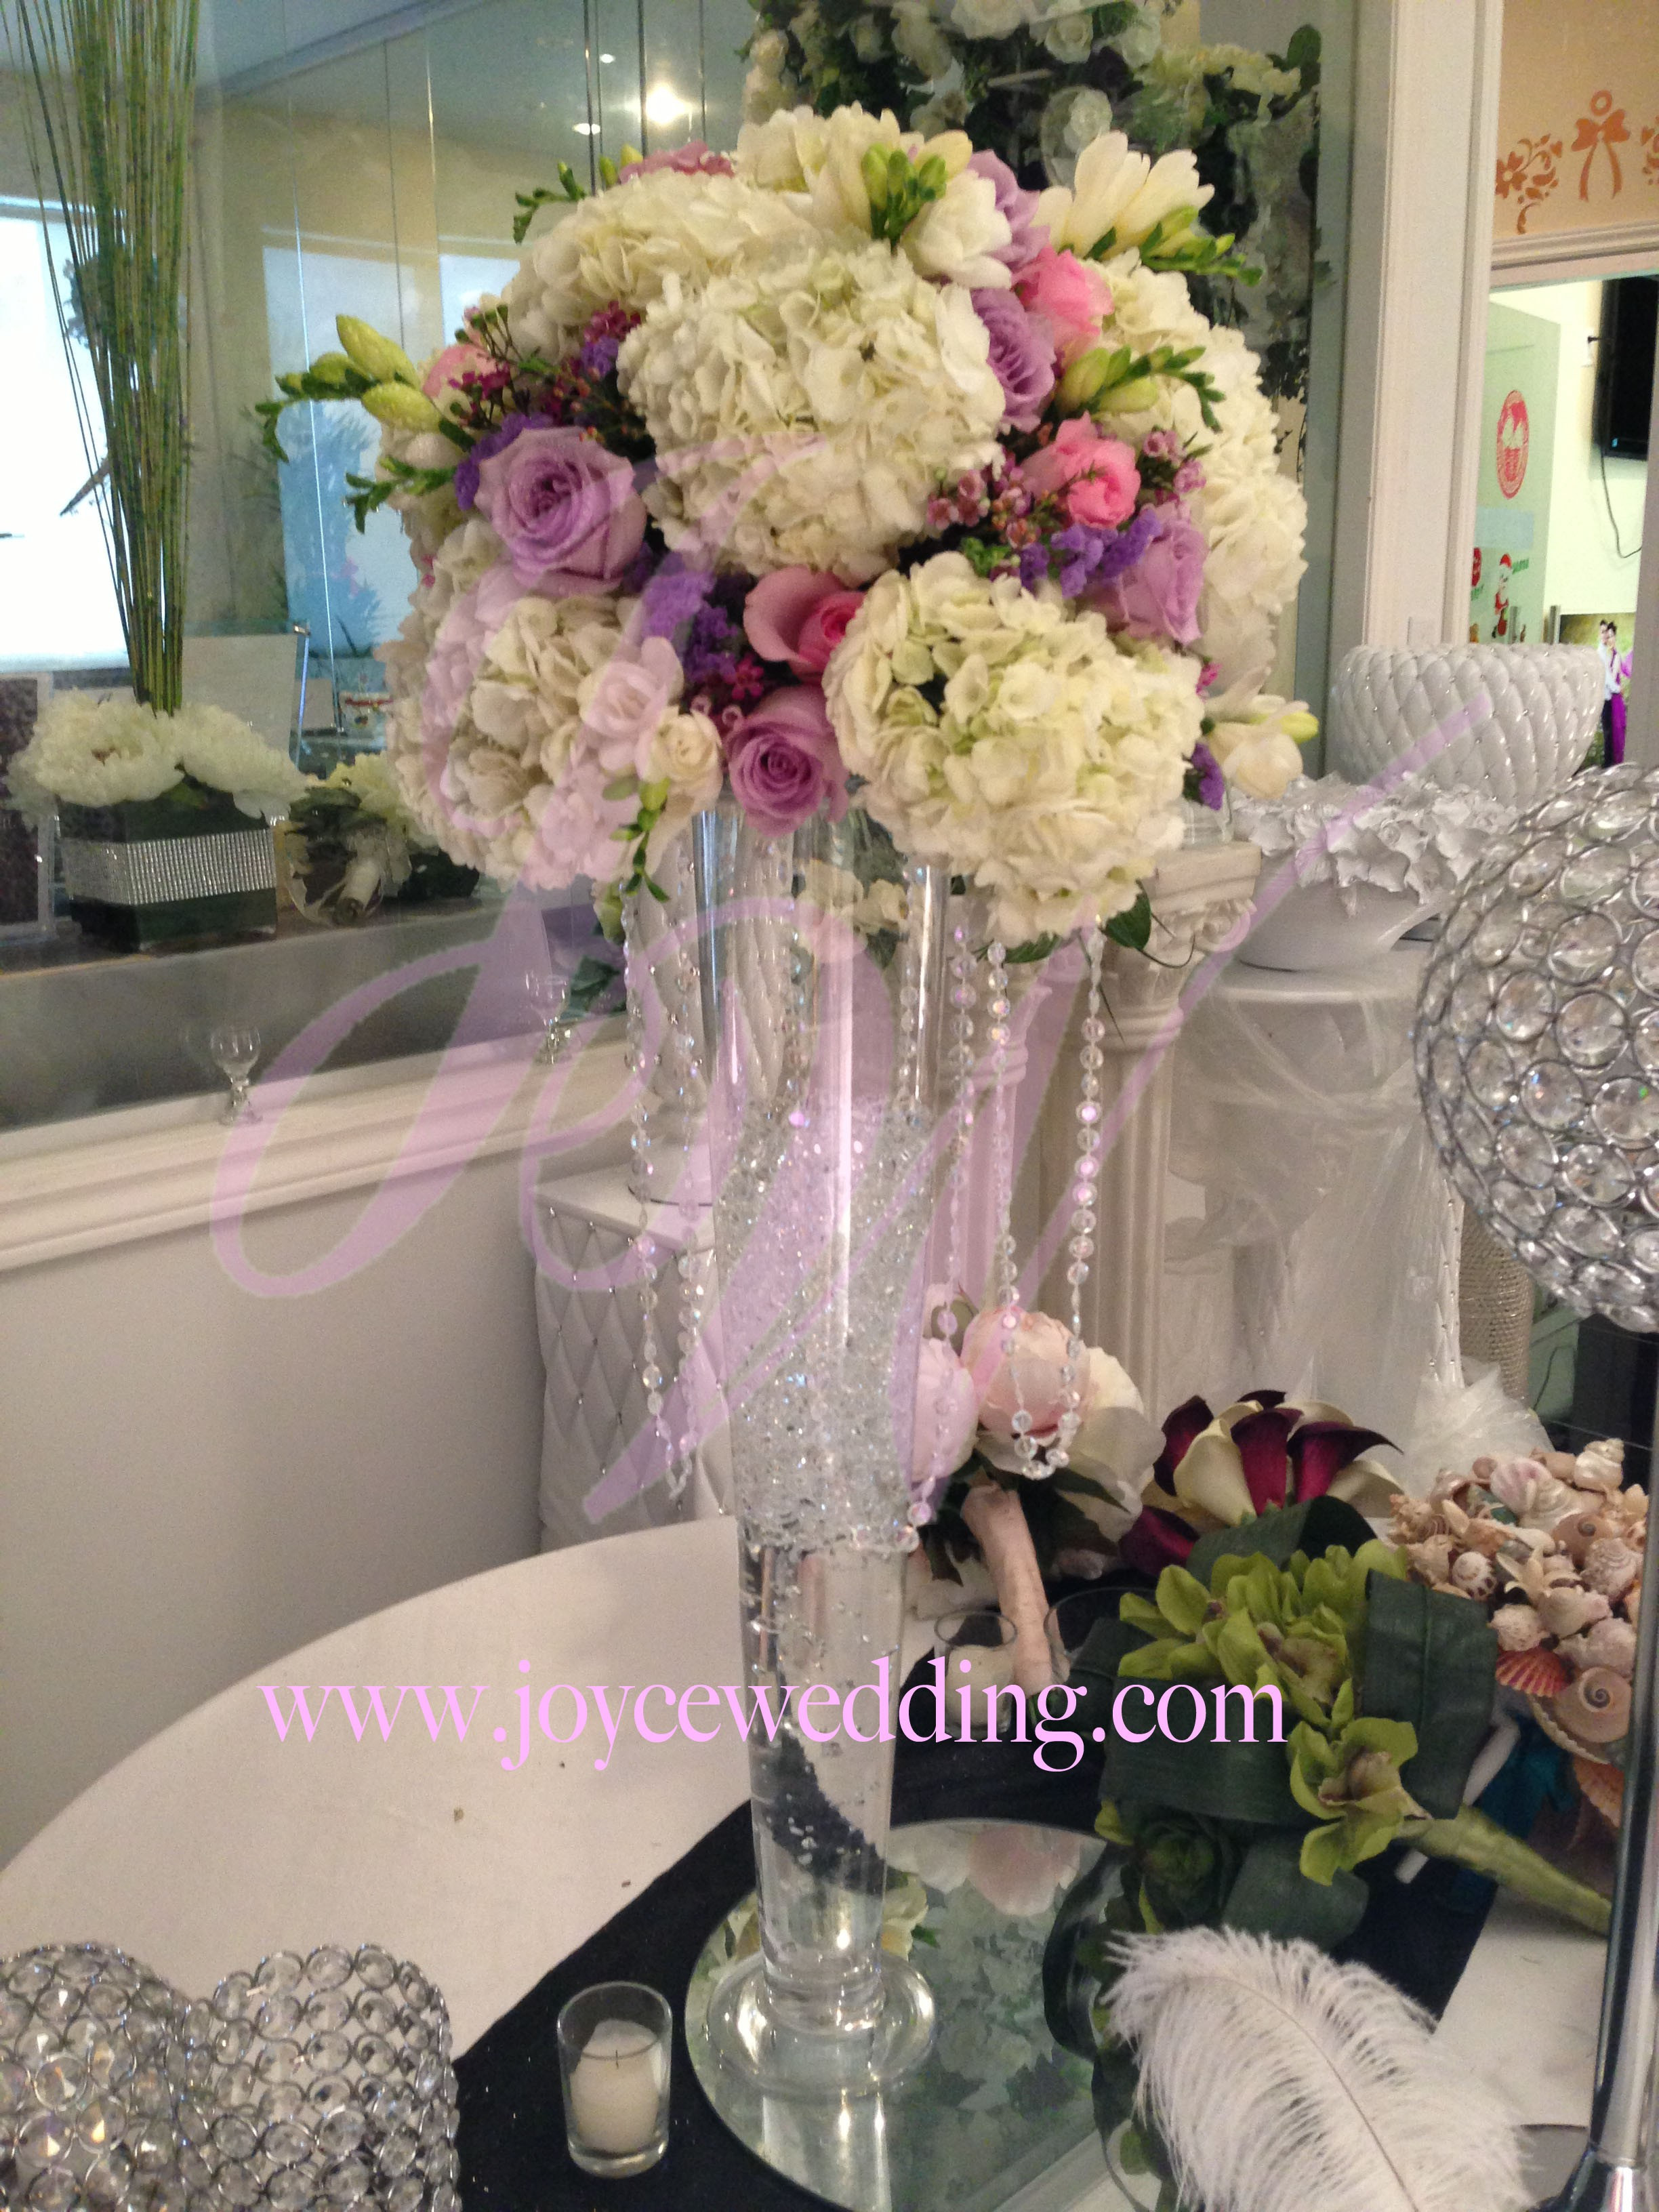 20 attractive Blush Pink Vase 2024 free download blush pink vase of hydrangea decorations wedding unique cool wedding ideas as for h with regard to hydrangea decorations wedding awesome tall silk flower wedding centerpieces flowers healthy